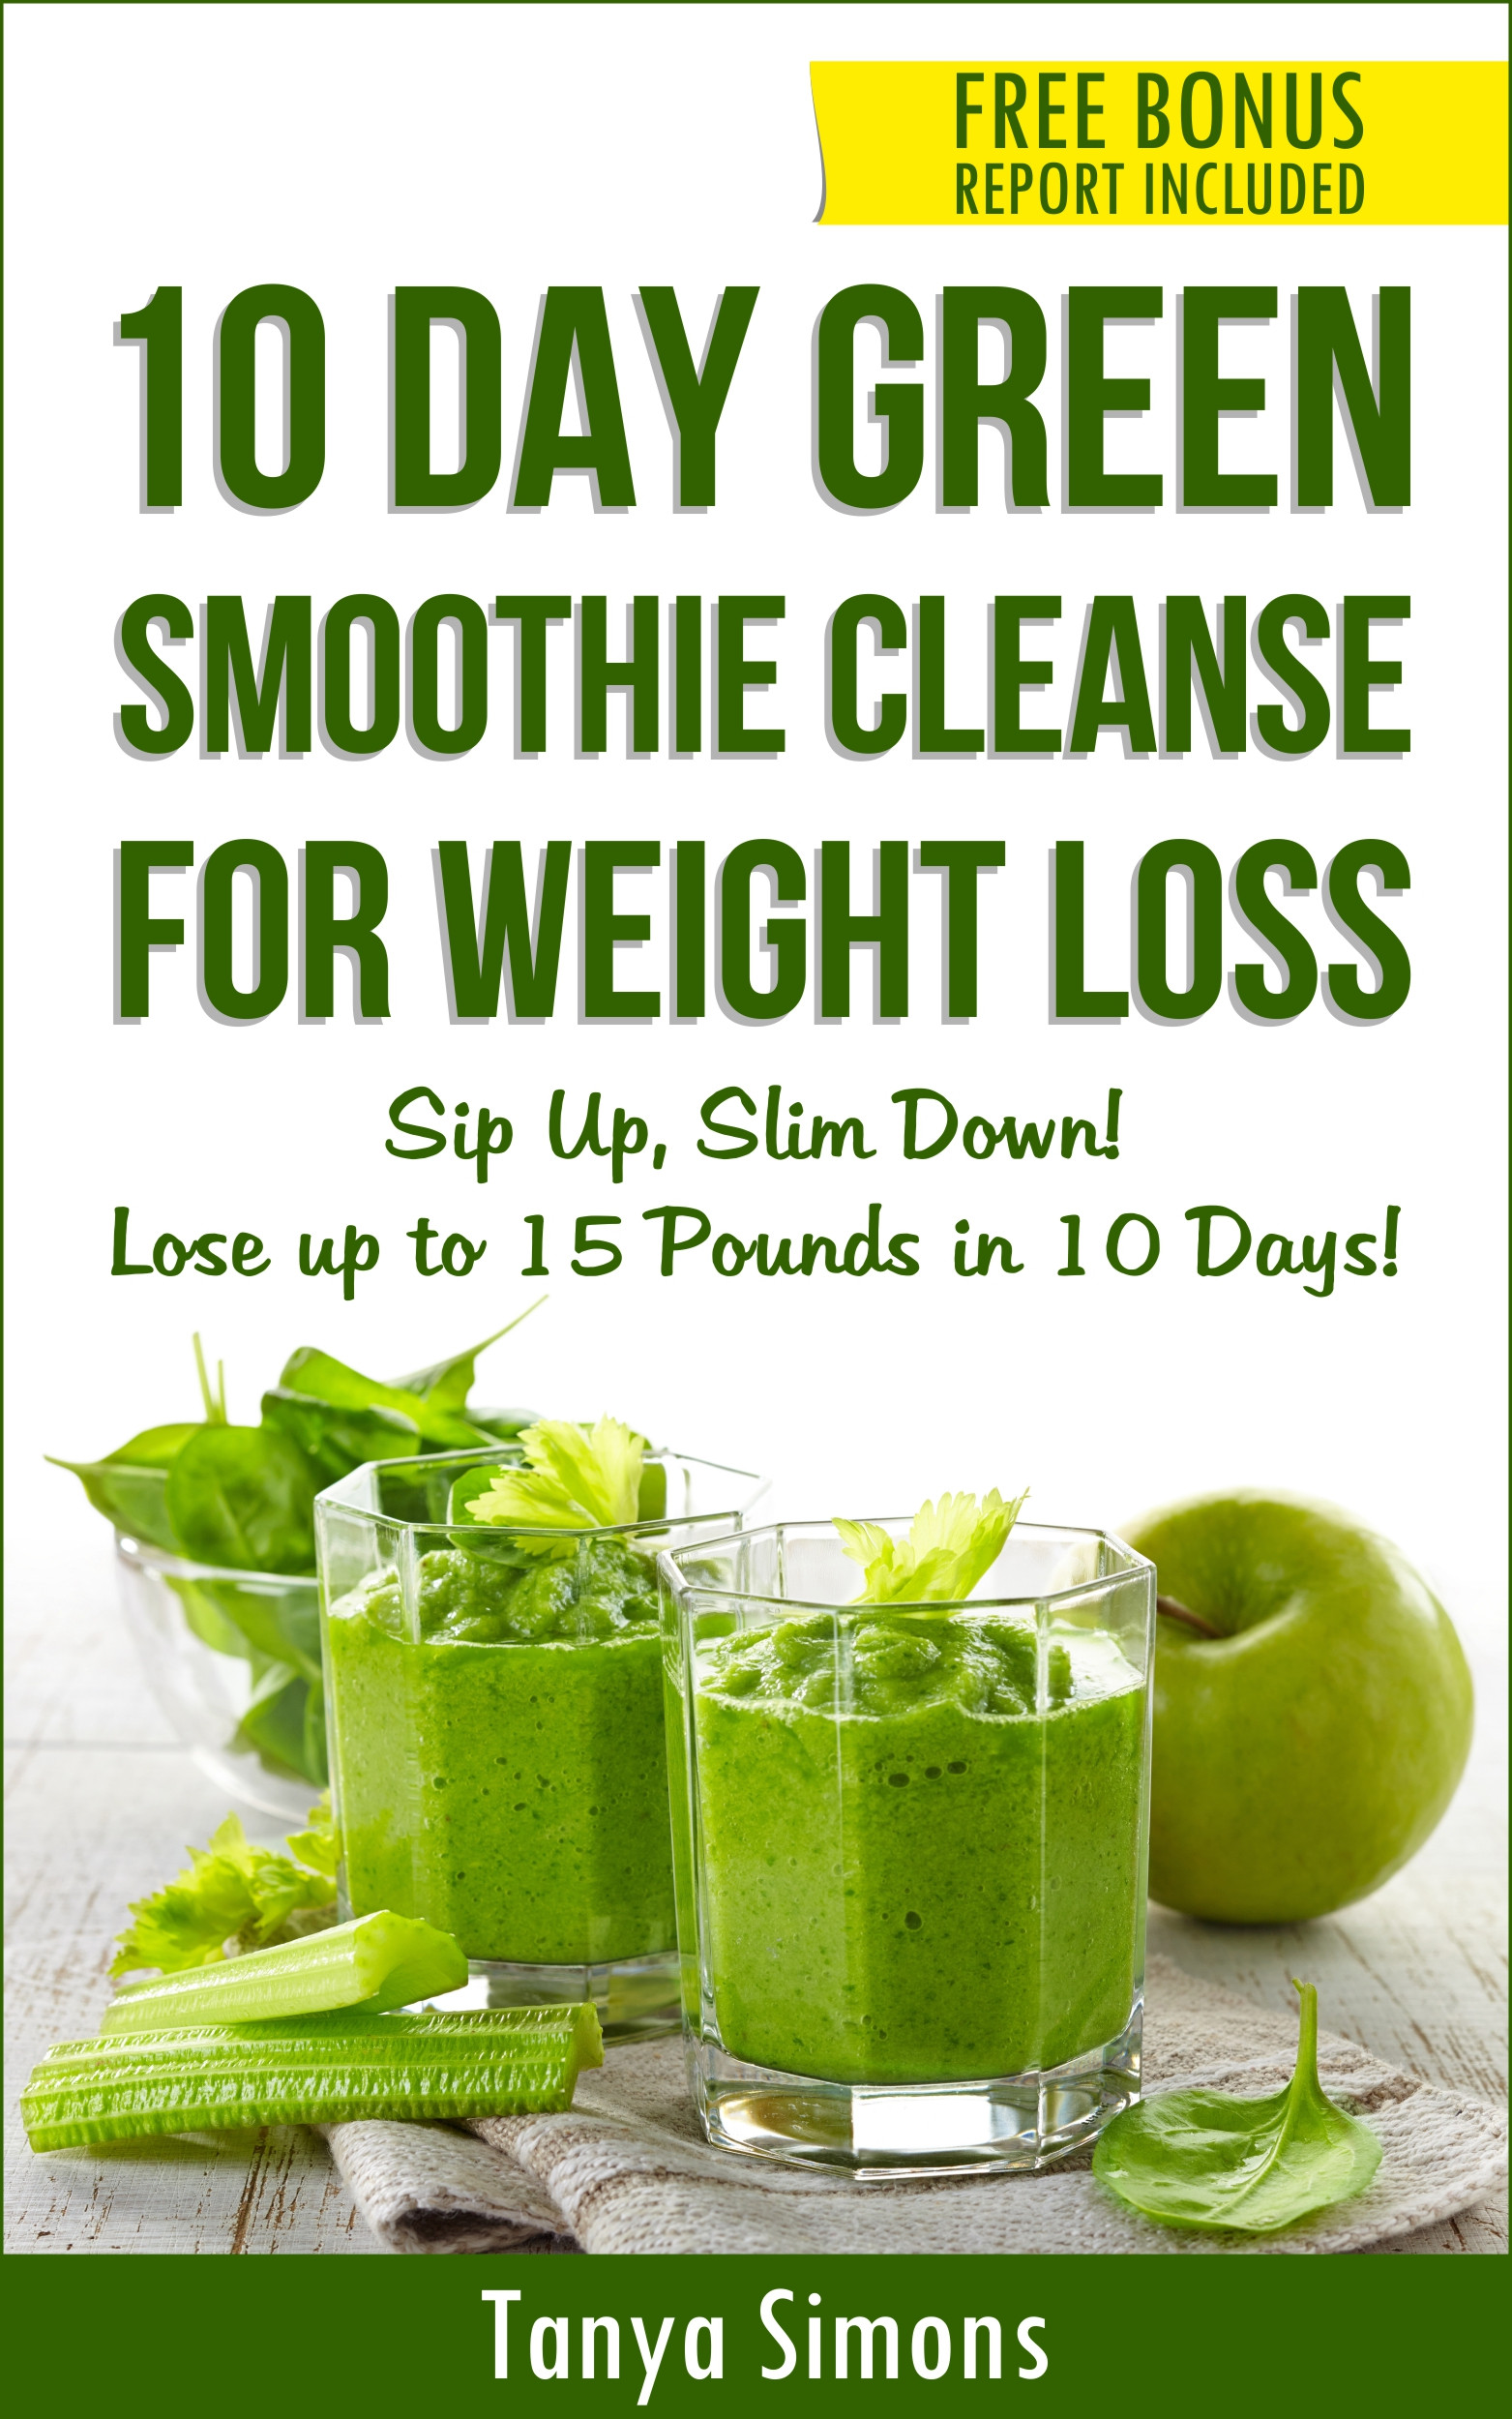 Green Smoothies for Weight Loss Recipes Best Of 10 Day Green Smoothie Cleanse Lose 15lbs with 10 Day